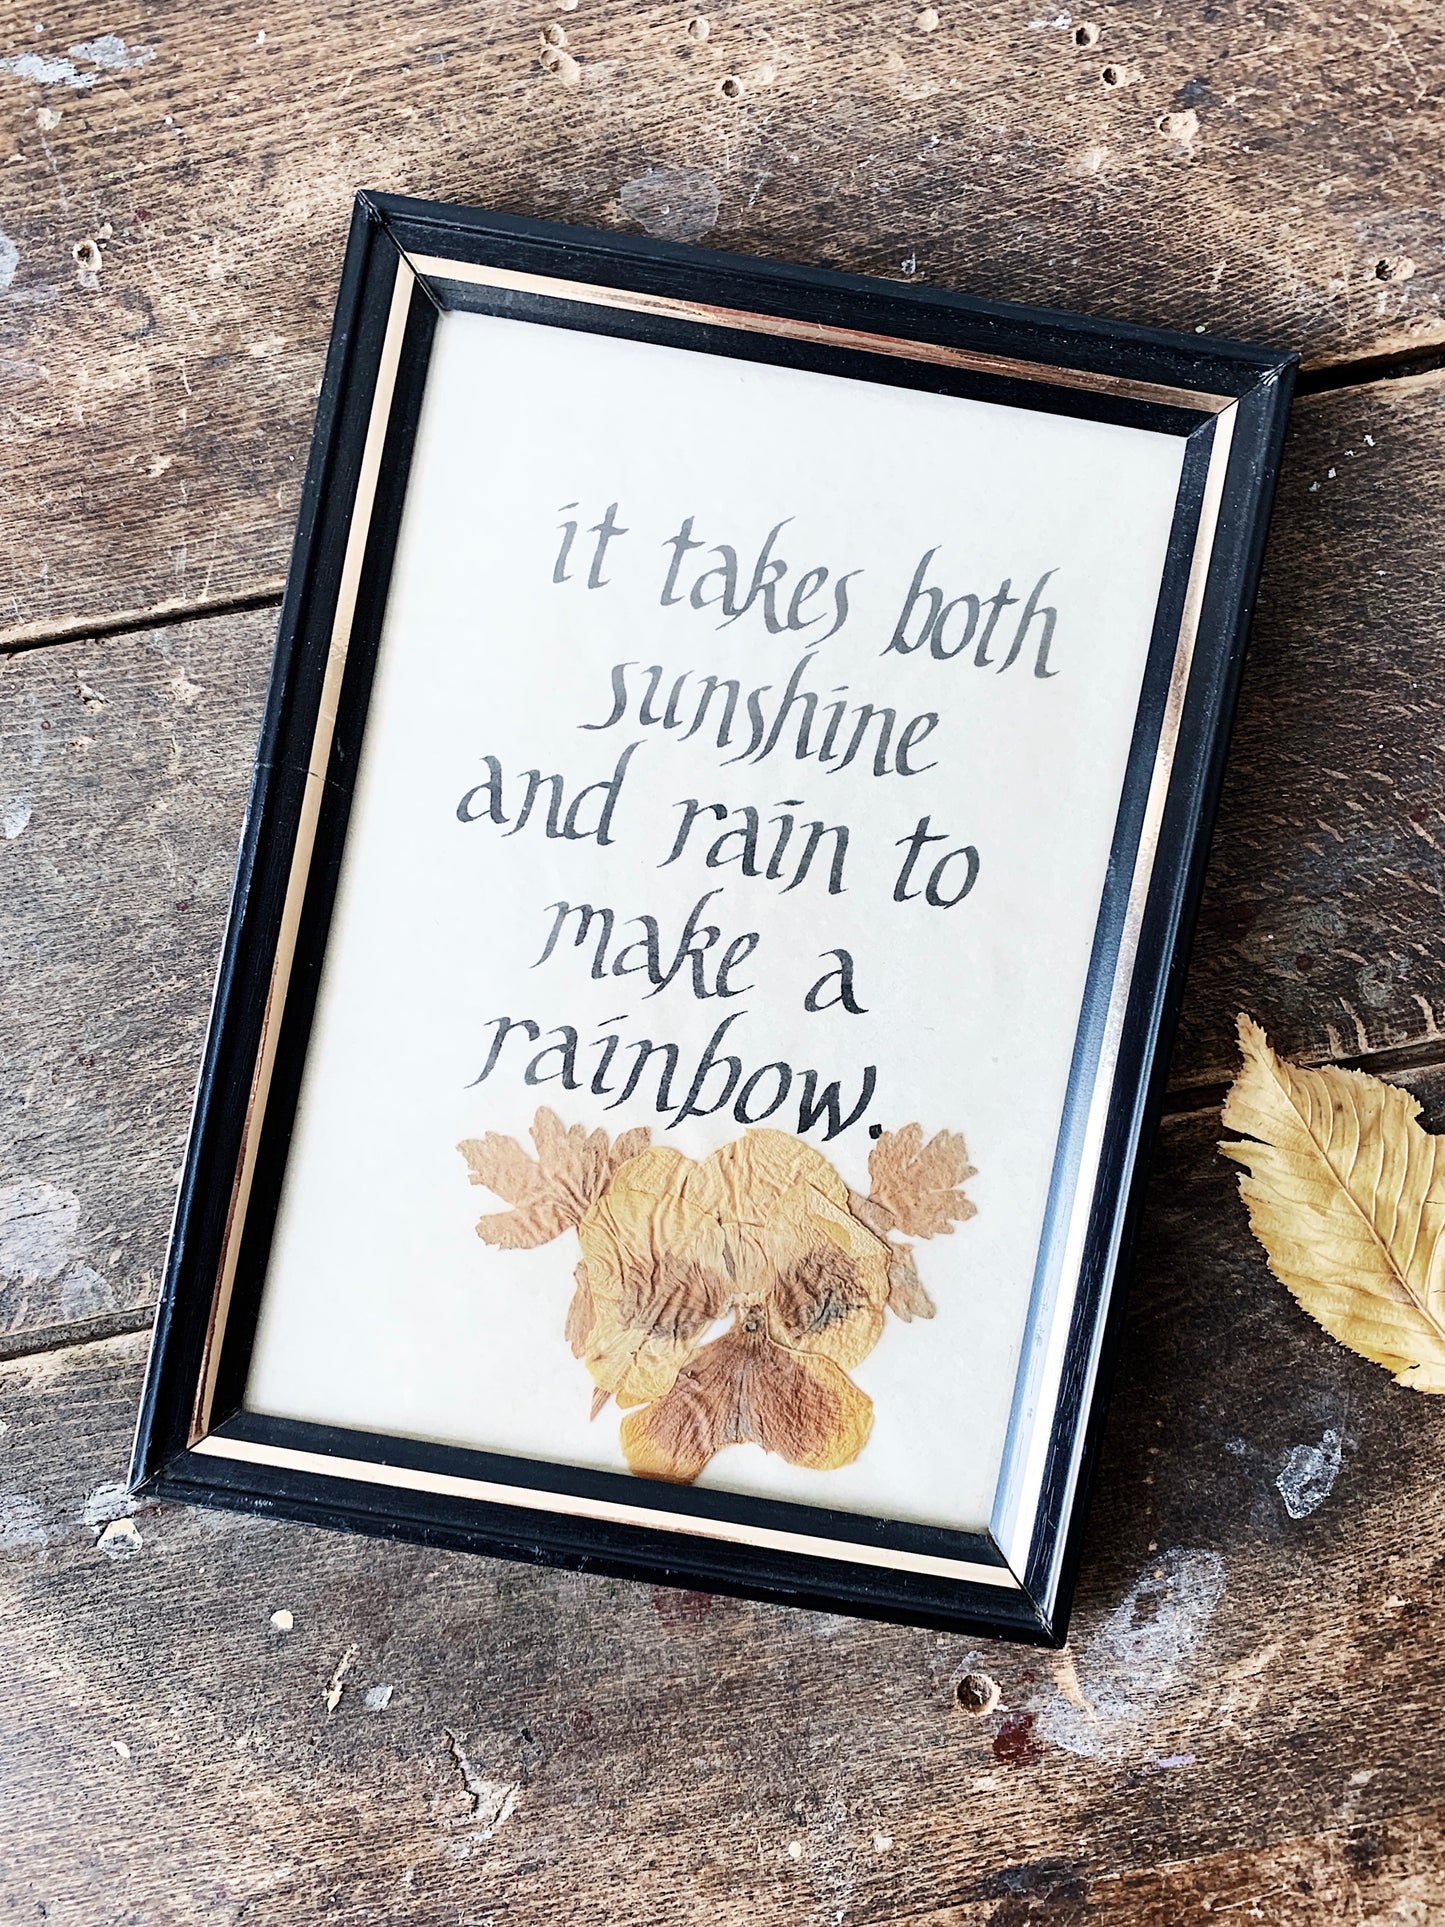 Vintage Framed Calligraphy with Dried Flower